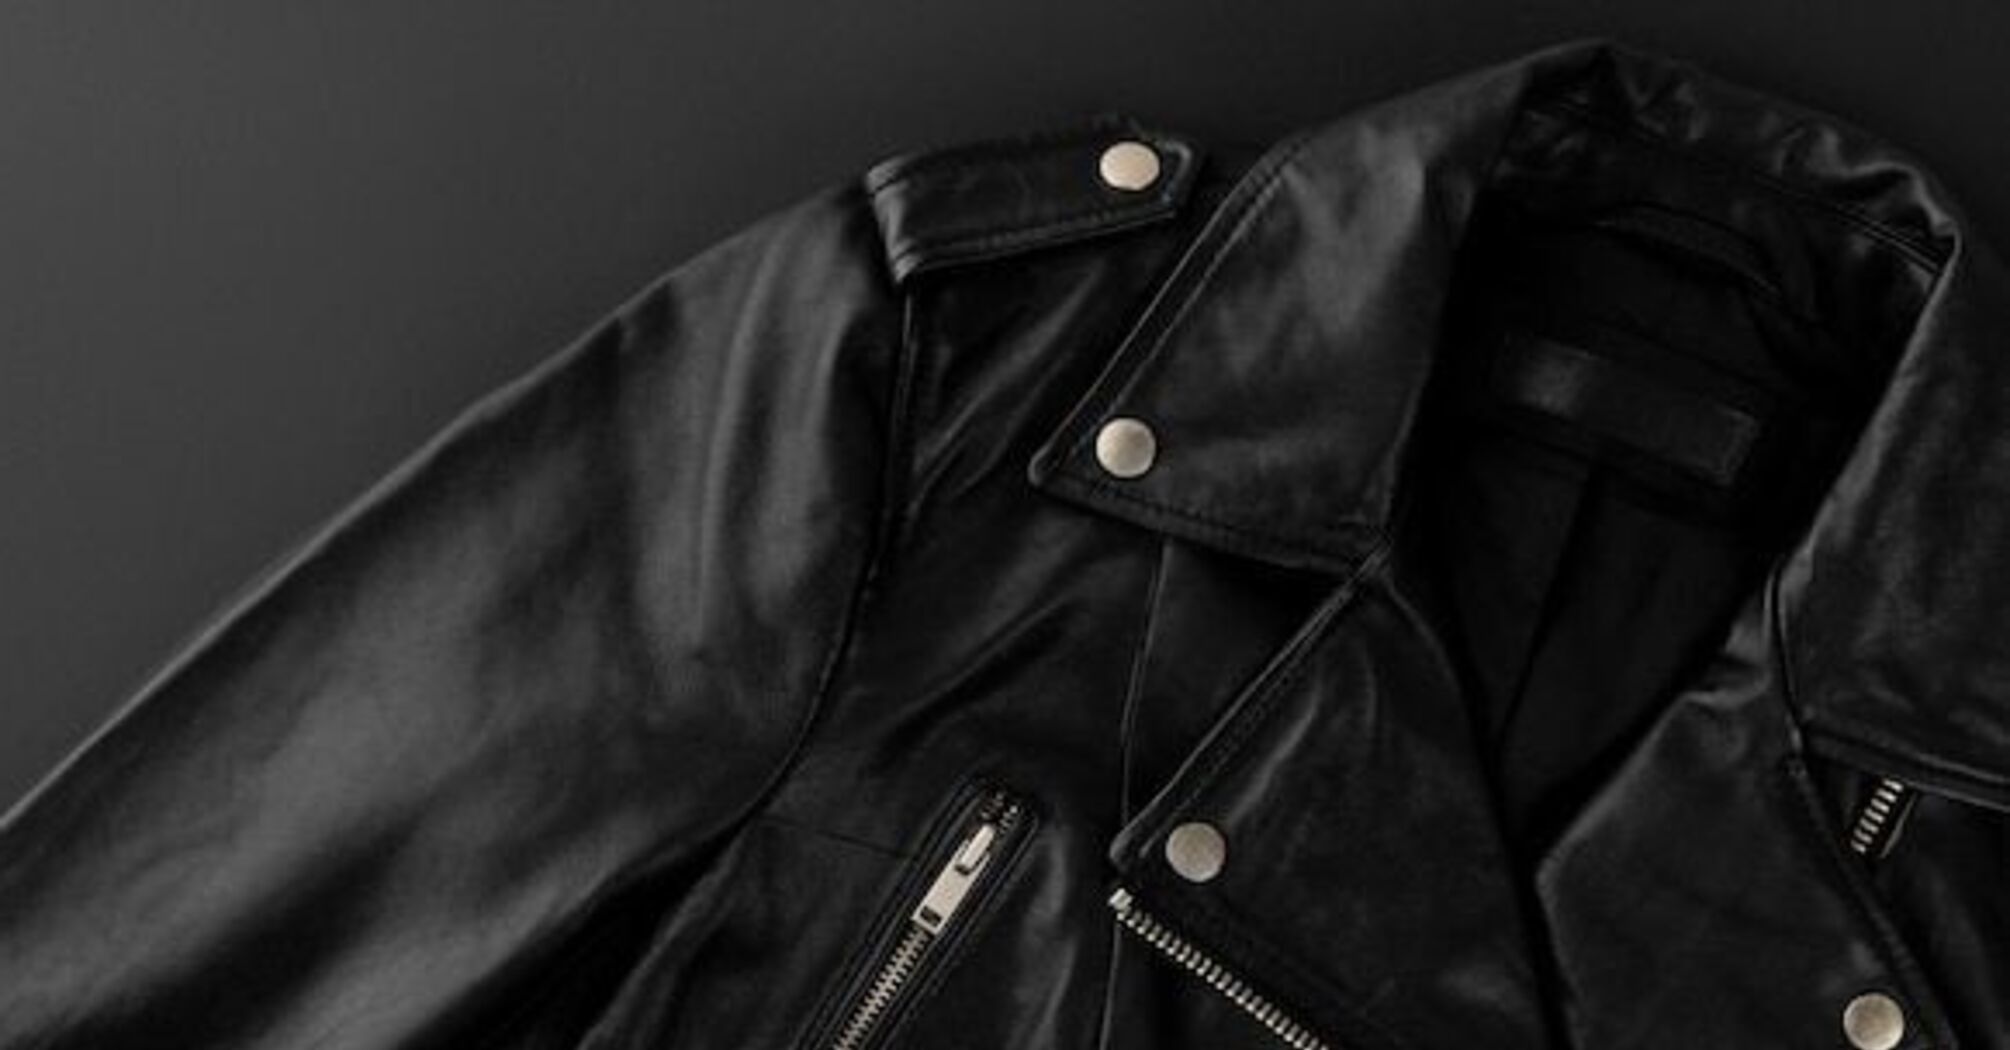 How to properly care for leather clothing: Effective methods